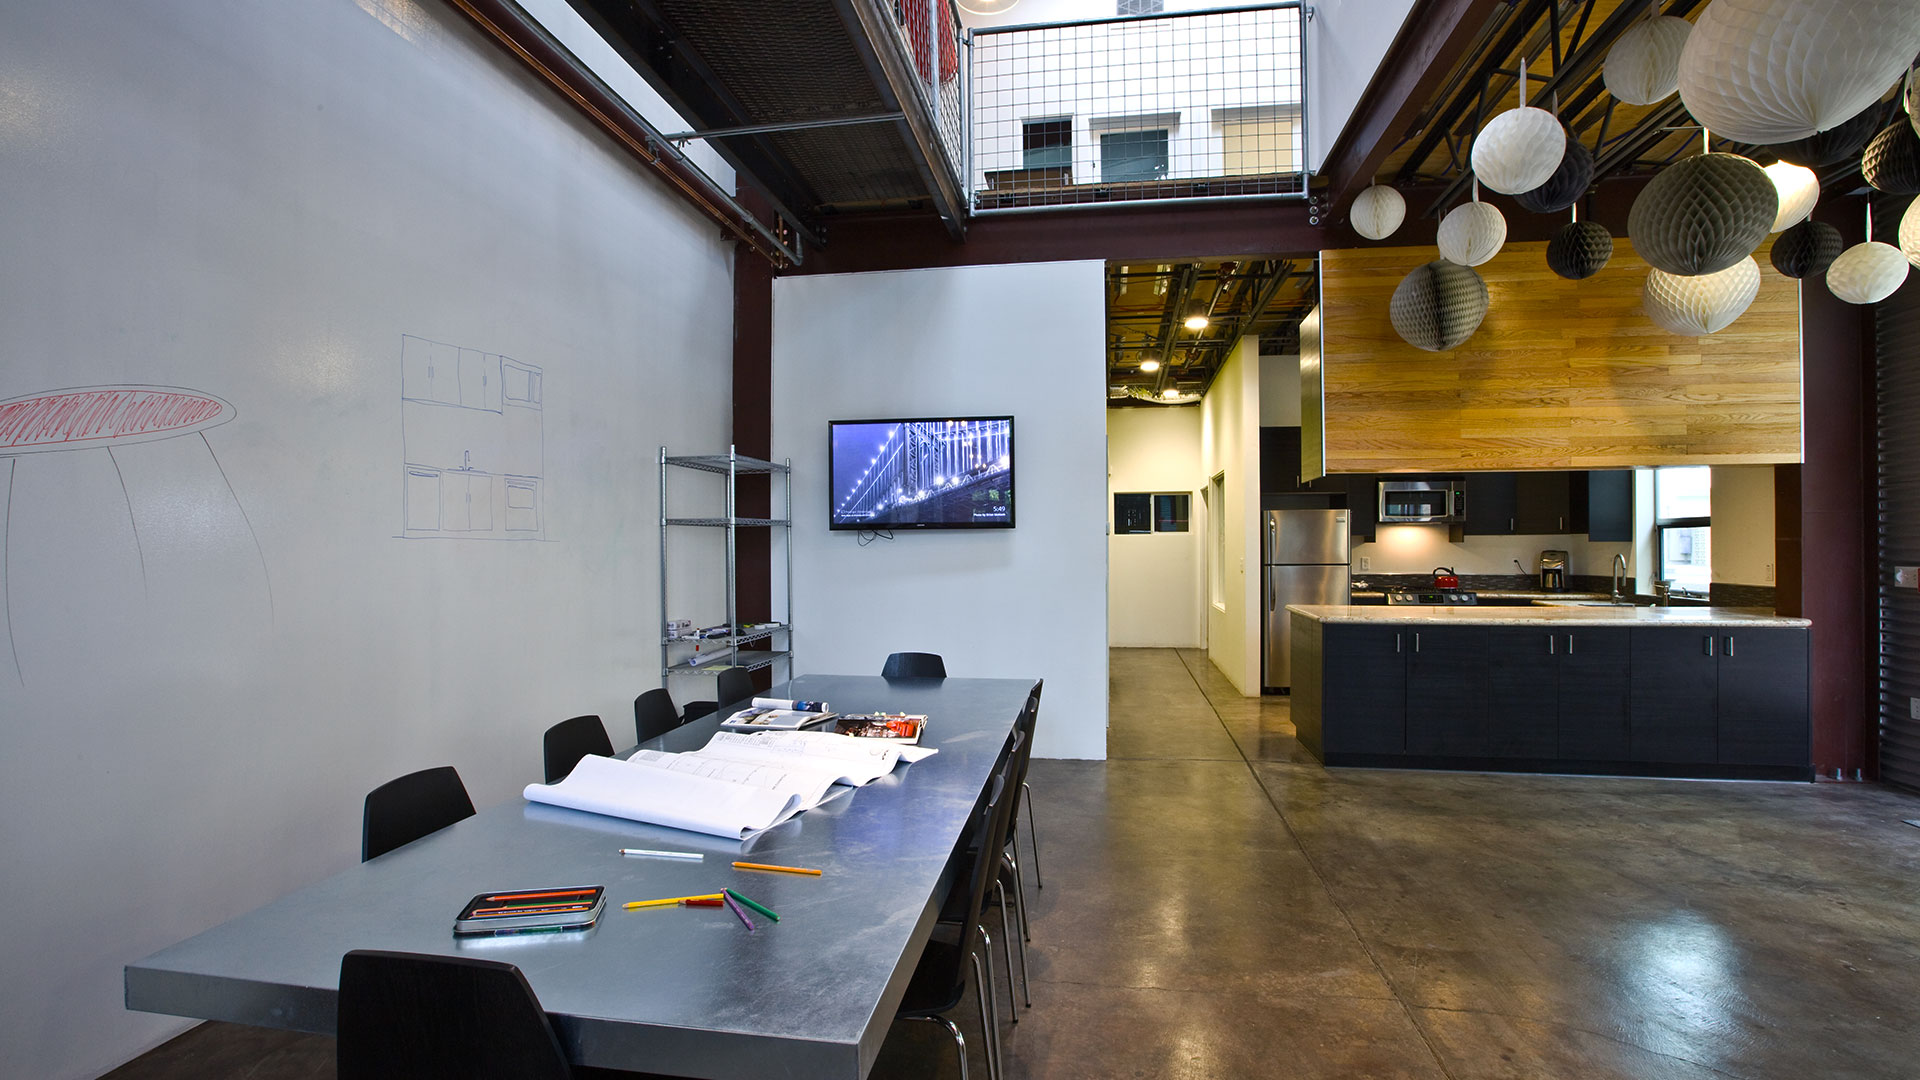 Interior of Persinger office, large metal conference table with TV behind, metal catwalk above